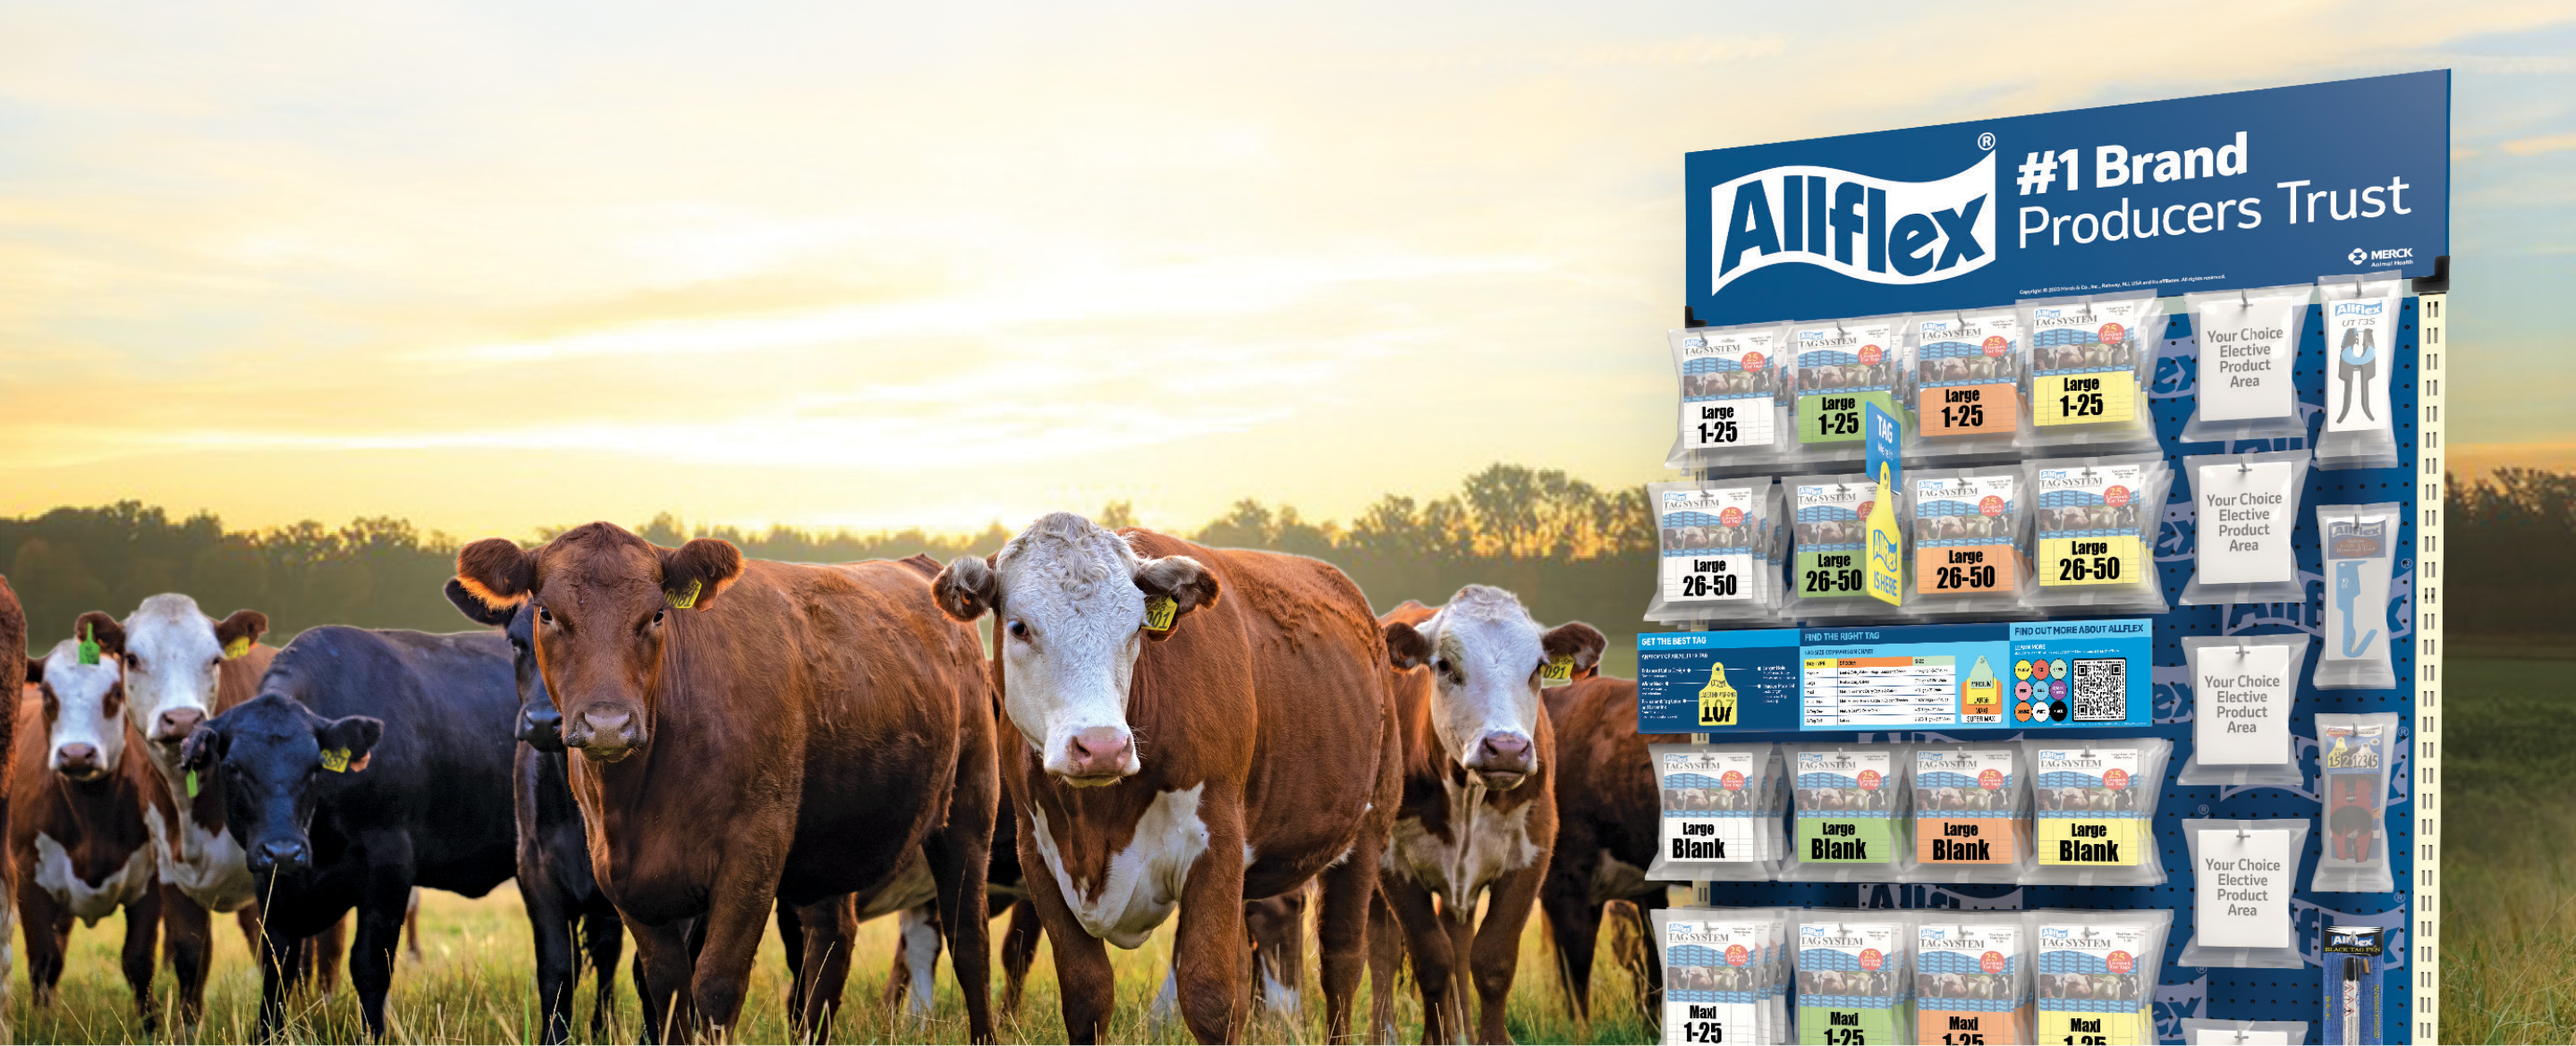 cows beside a marketing stand for allflex